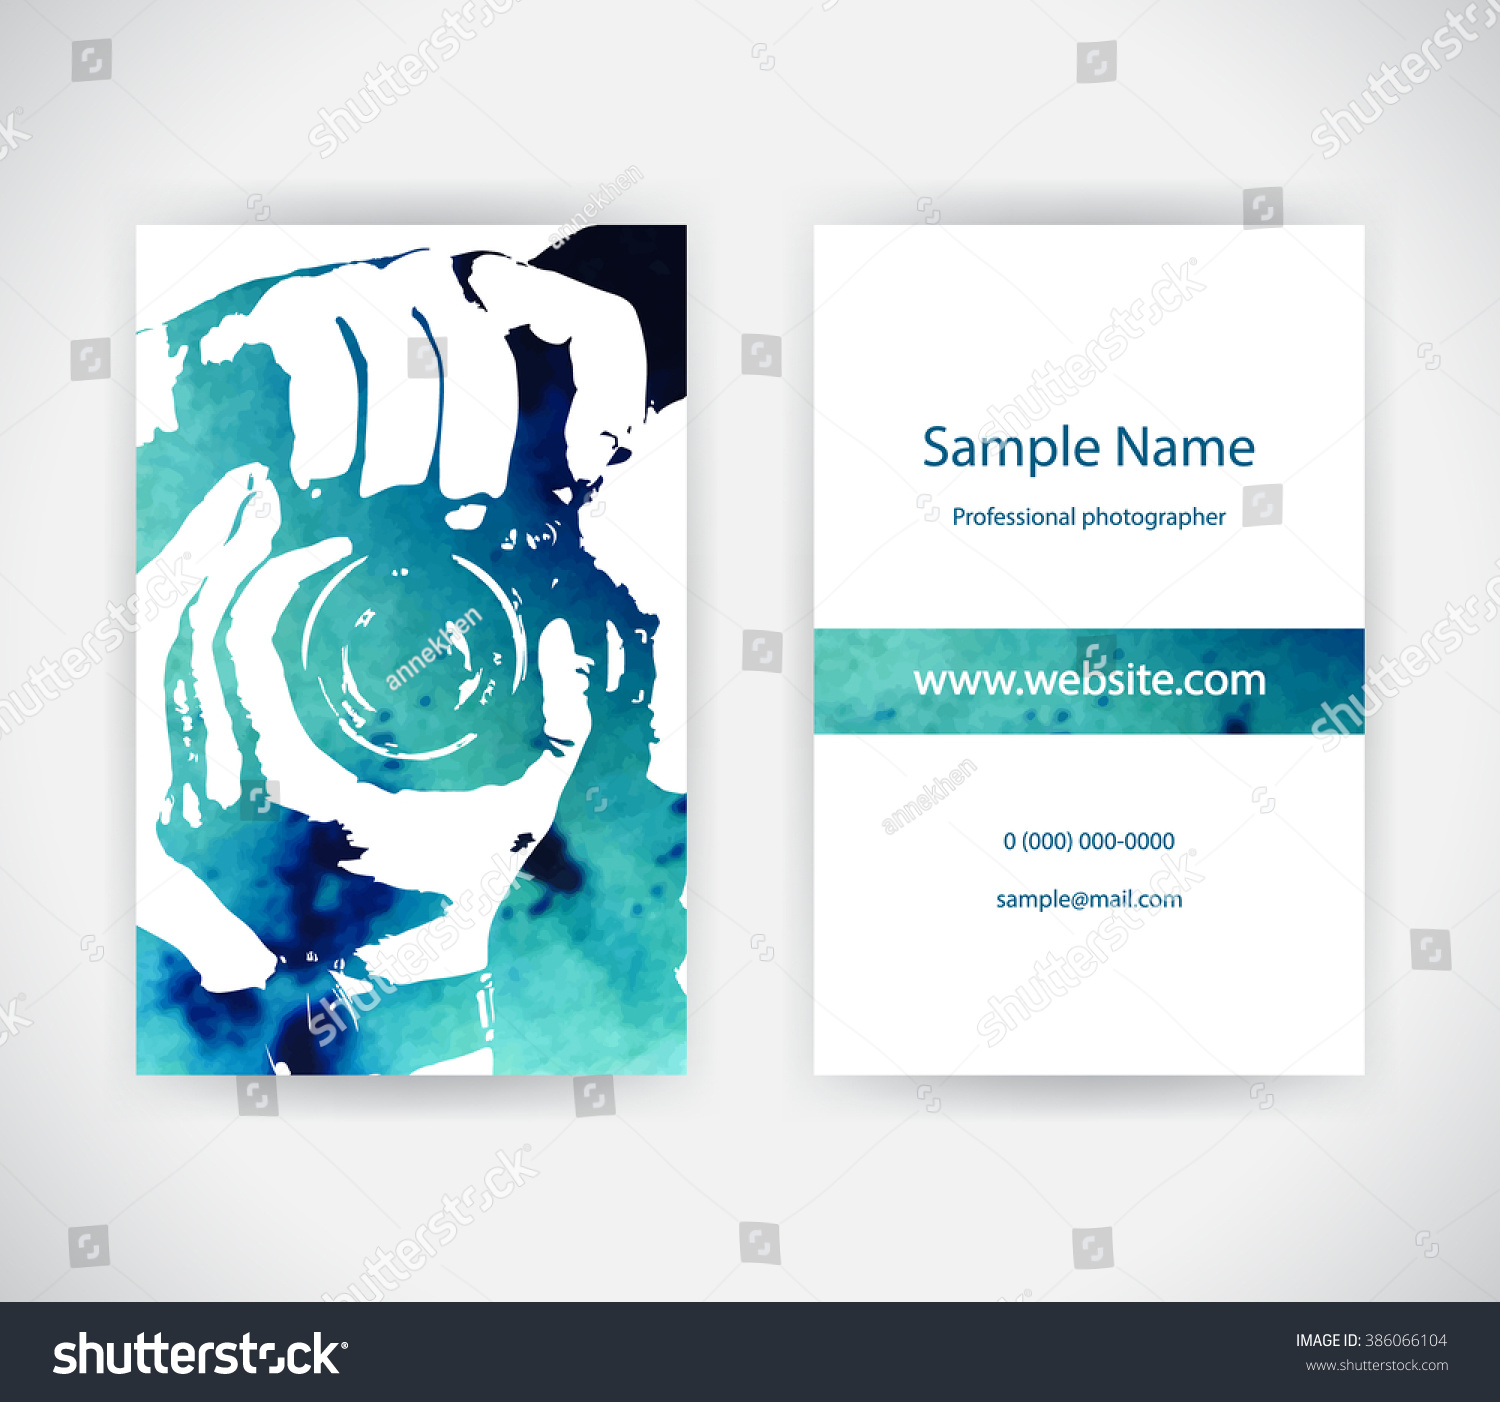 Vector Business Card Photographer On Background Stock Vector With Photographer Id Card Template